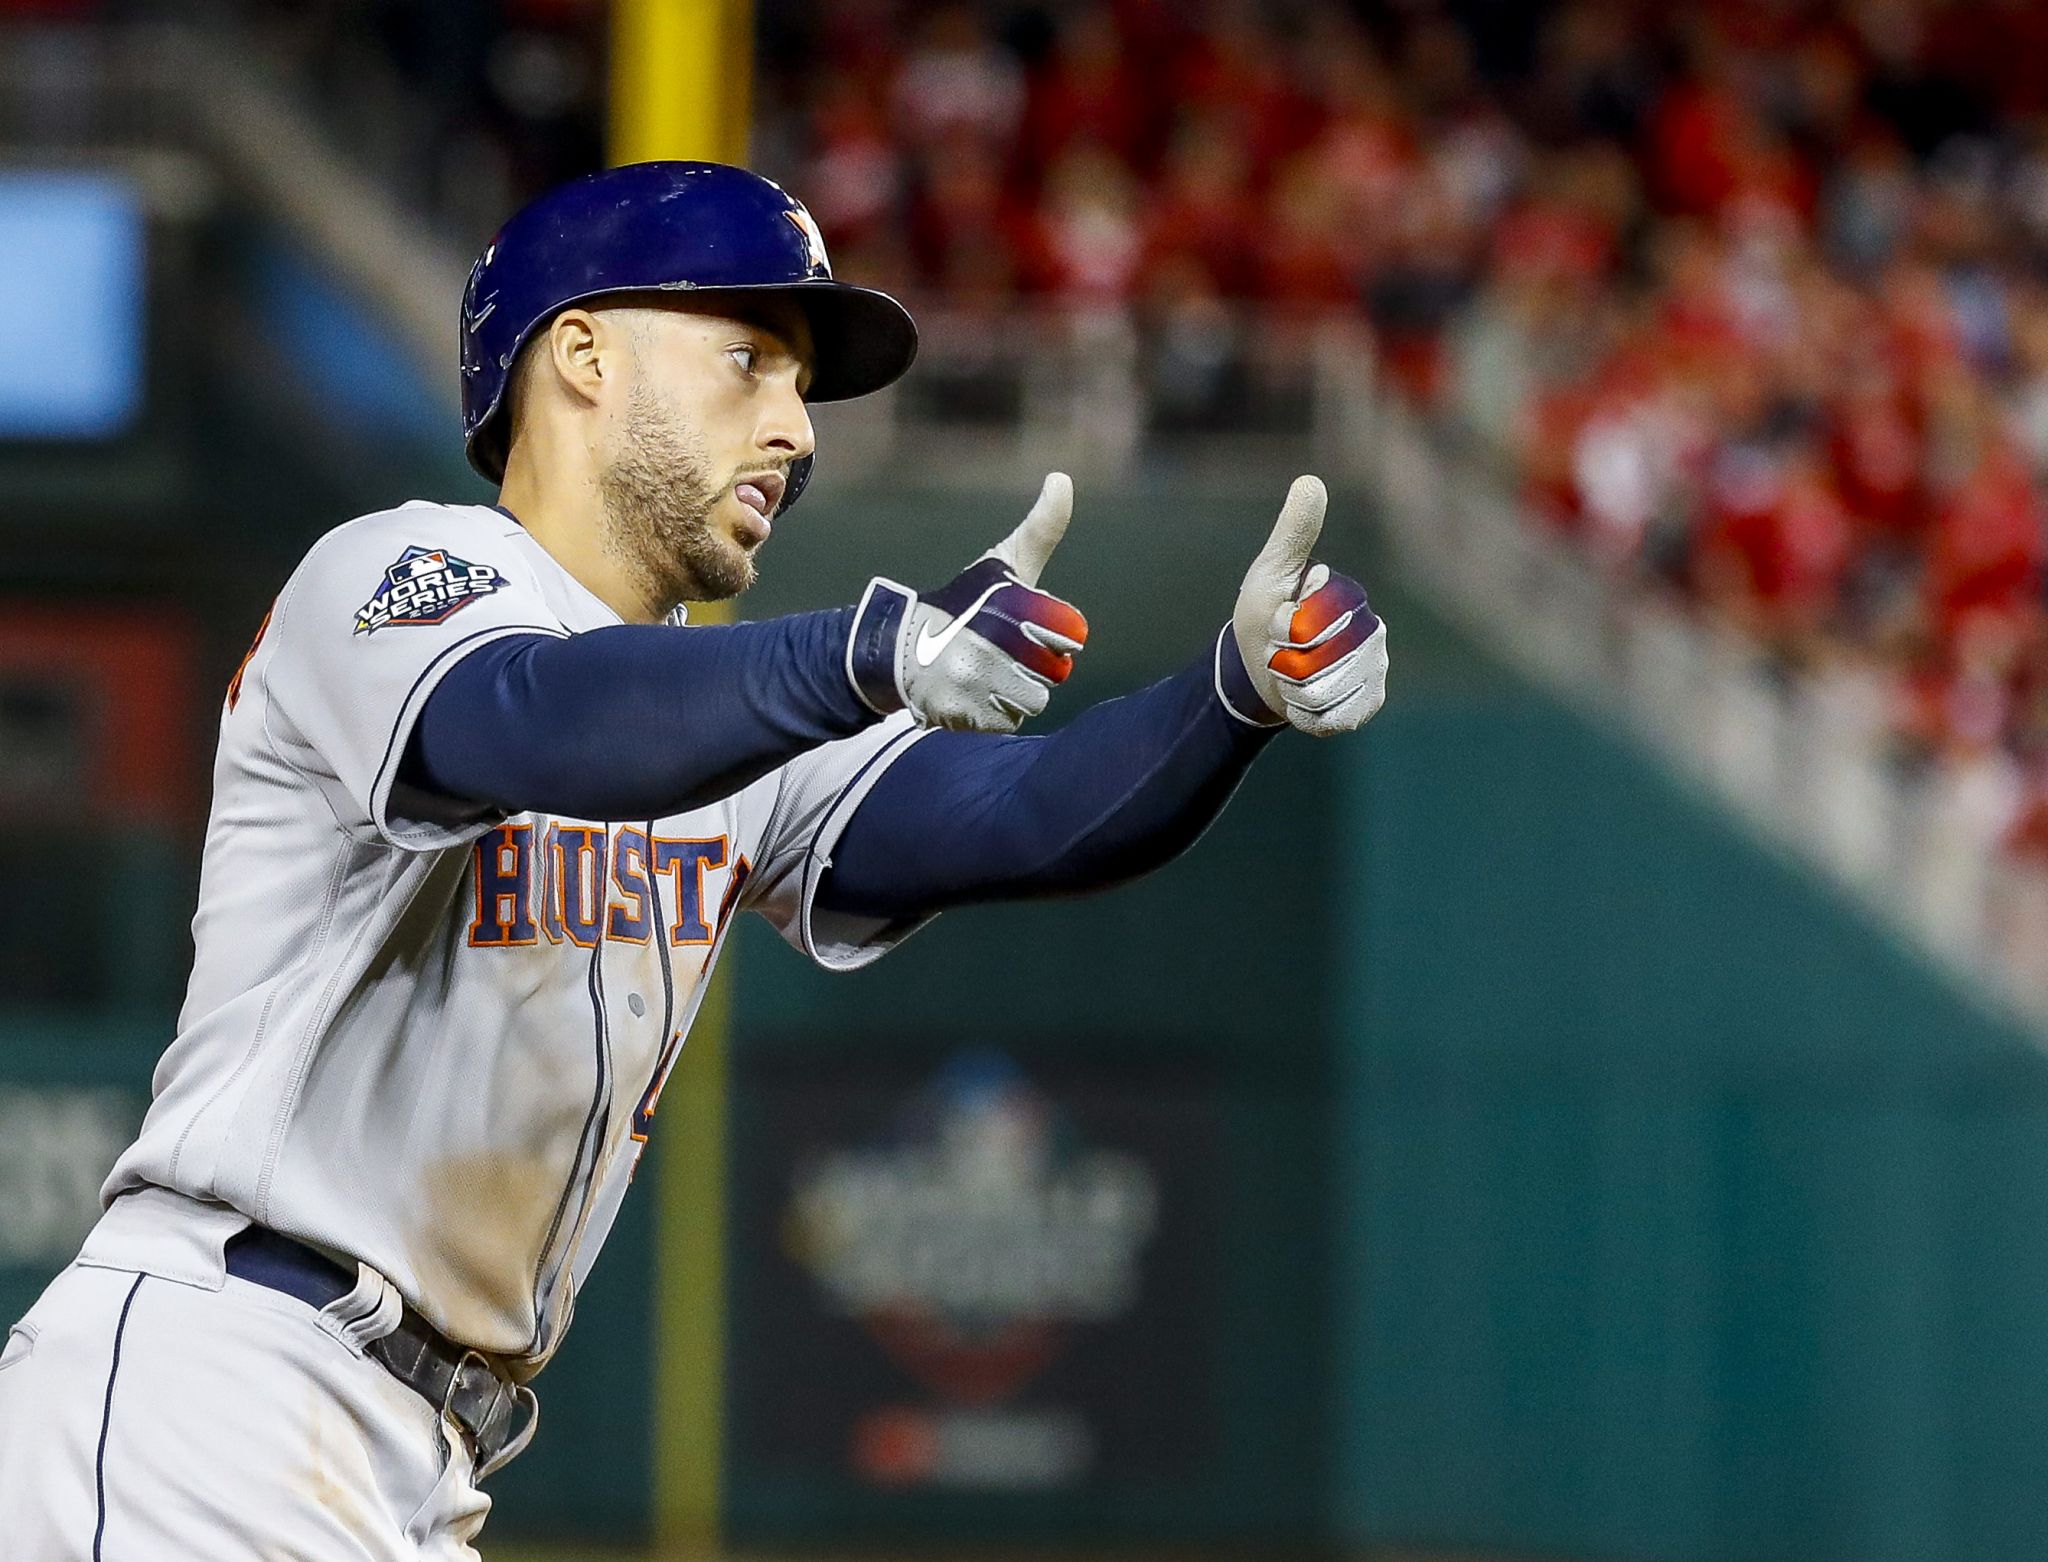 Astros sign George Springer to 2-year deal, avoiding arbitration